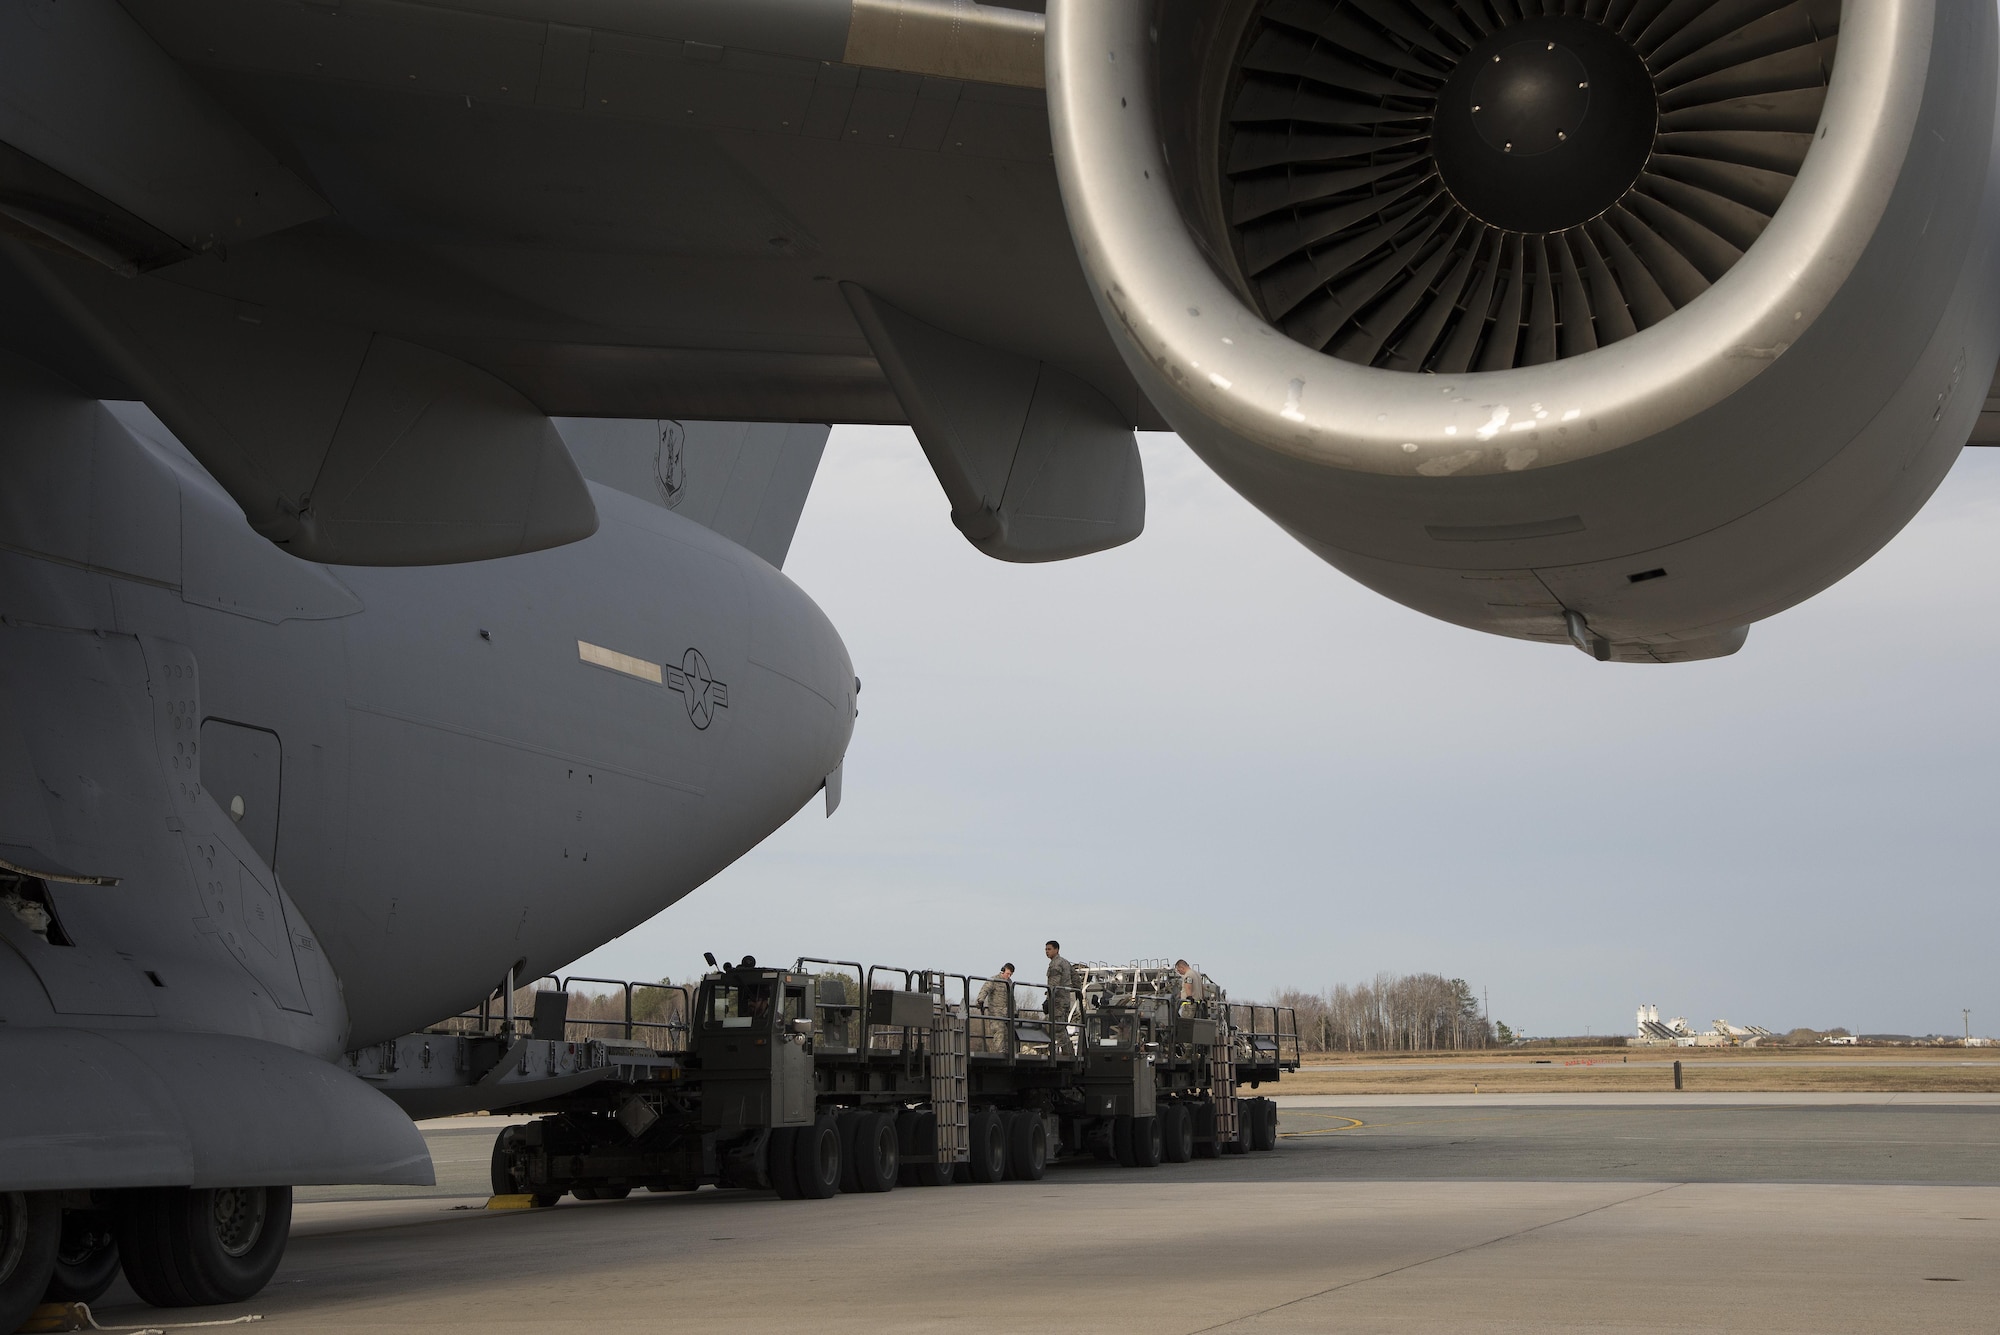 Aerial port expediters assigned to the 436th Aerial Port Squadron offload a C-17 Globemaster III Jan. 12, 2017, at Dover Air Force Base, Del. The unit’s ability to load and offload aircraft without loadmasters present allows work to be spread out more evenly, especially when peak workloads are expected. (U.S. Air Force photo by Senior Airman Aaron J. Jenne)